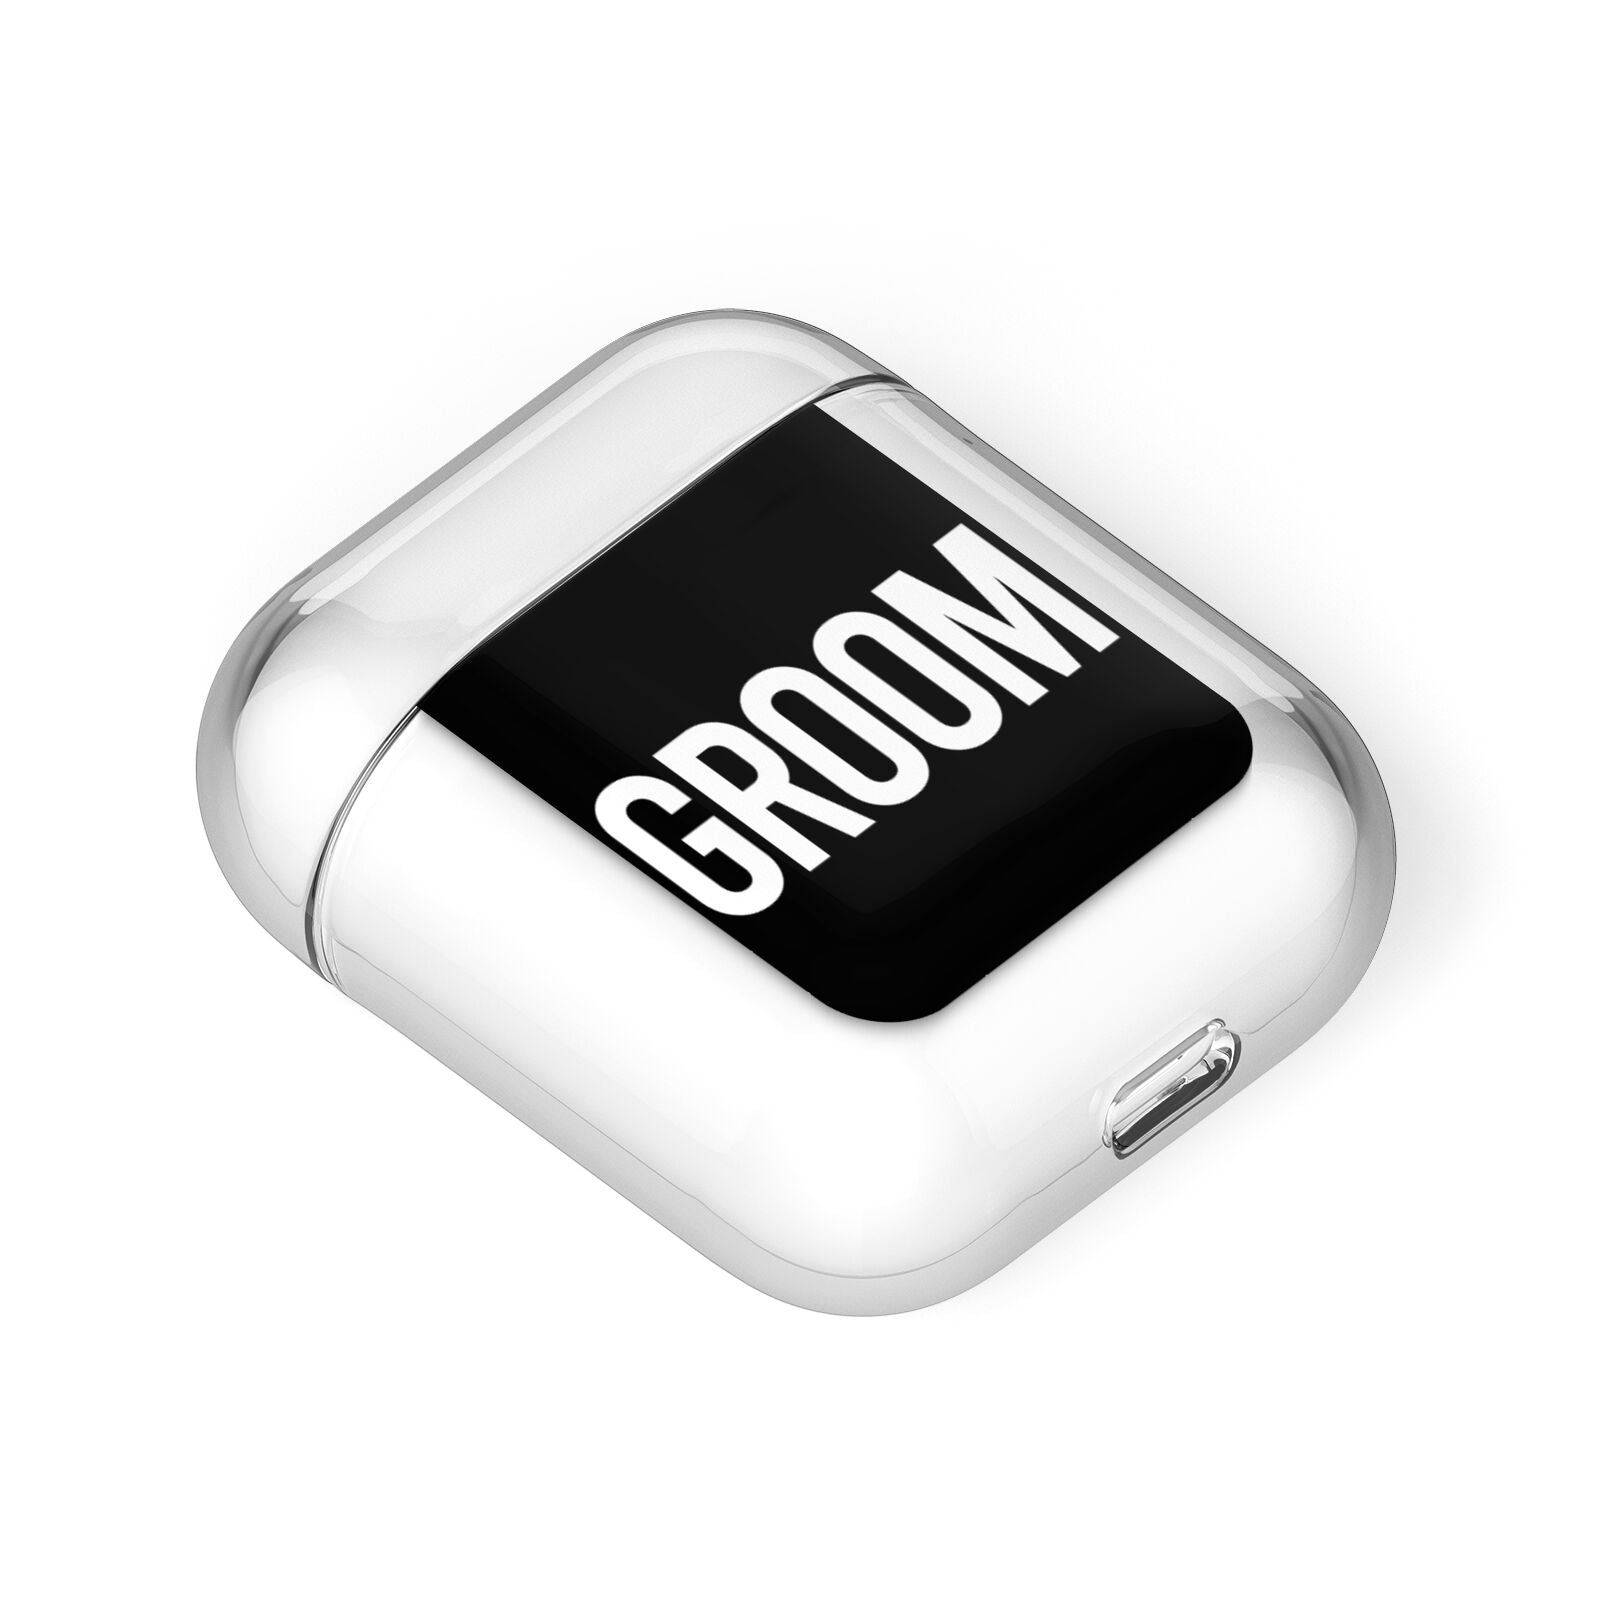 Groom AirPods Case Laid Flat